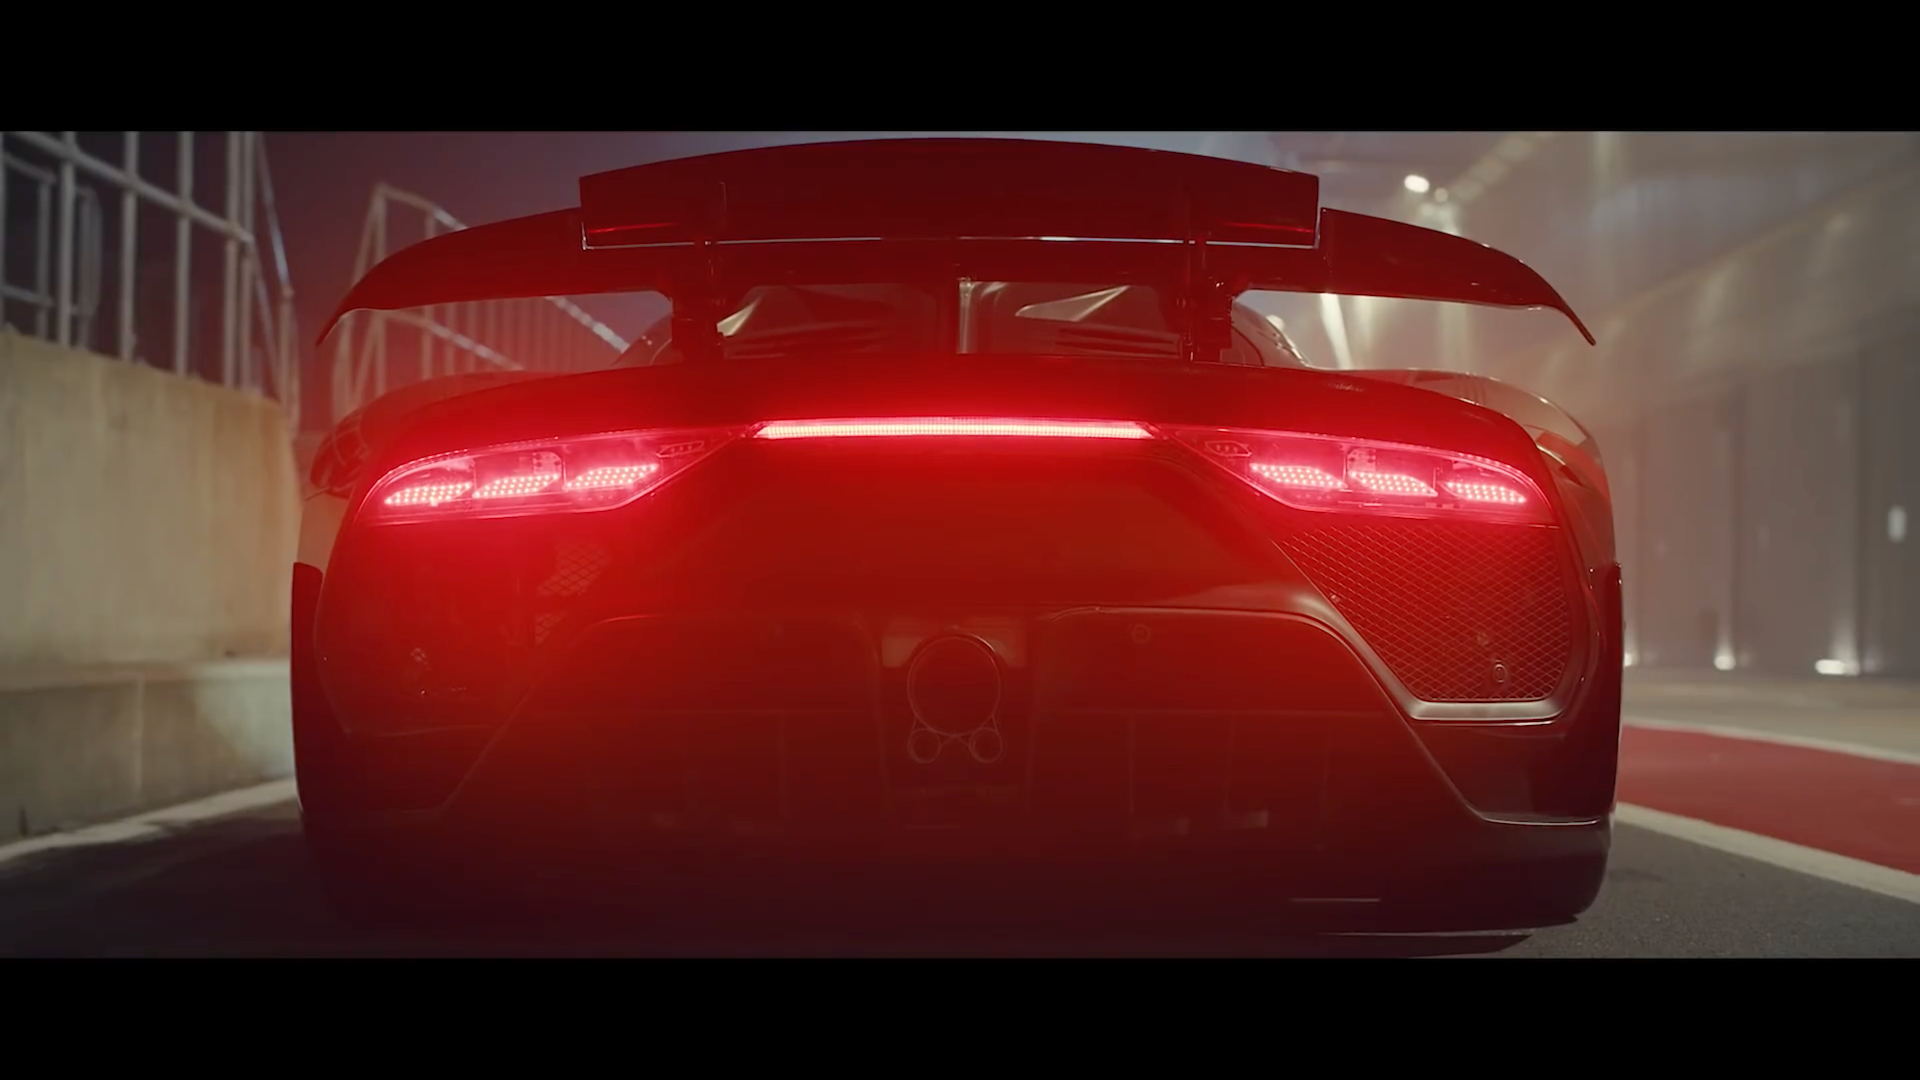 Watch the 1,000-HP Mercedes-AMG Project One Deploy Its Intimidating Full Aero Kit